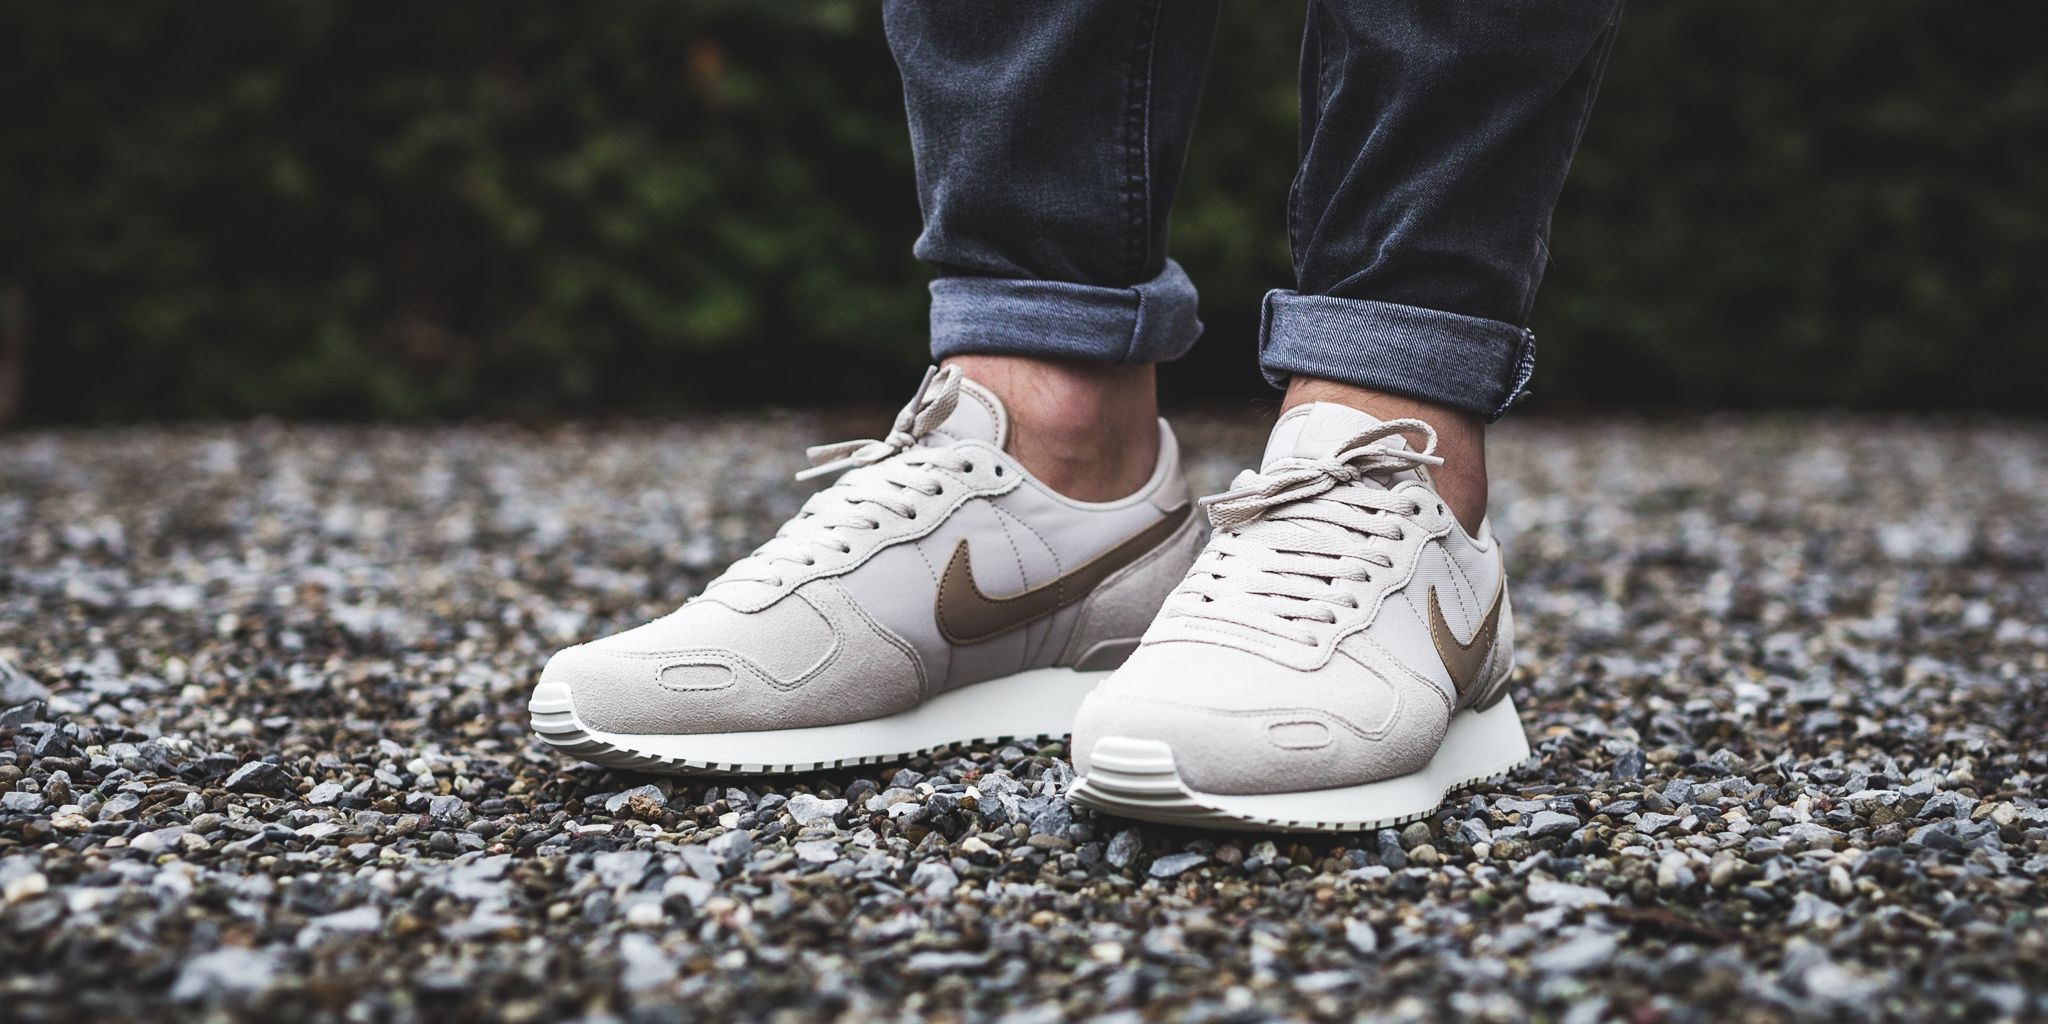 uno El otro día formar Titolo on Twitter: "NEW IN! Nike Air Vortex Leather - Desert Sand/Sand-Sail  SHOP HERE: https://t.co/yJvquH4B4N https://t.co/GXLr62CQ6u" / Twitter